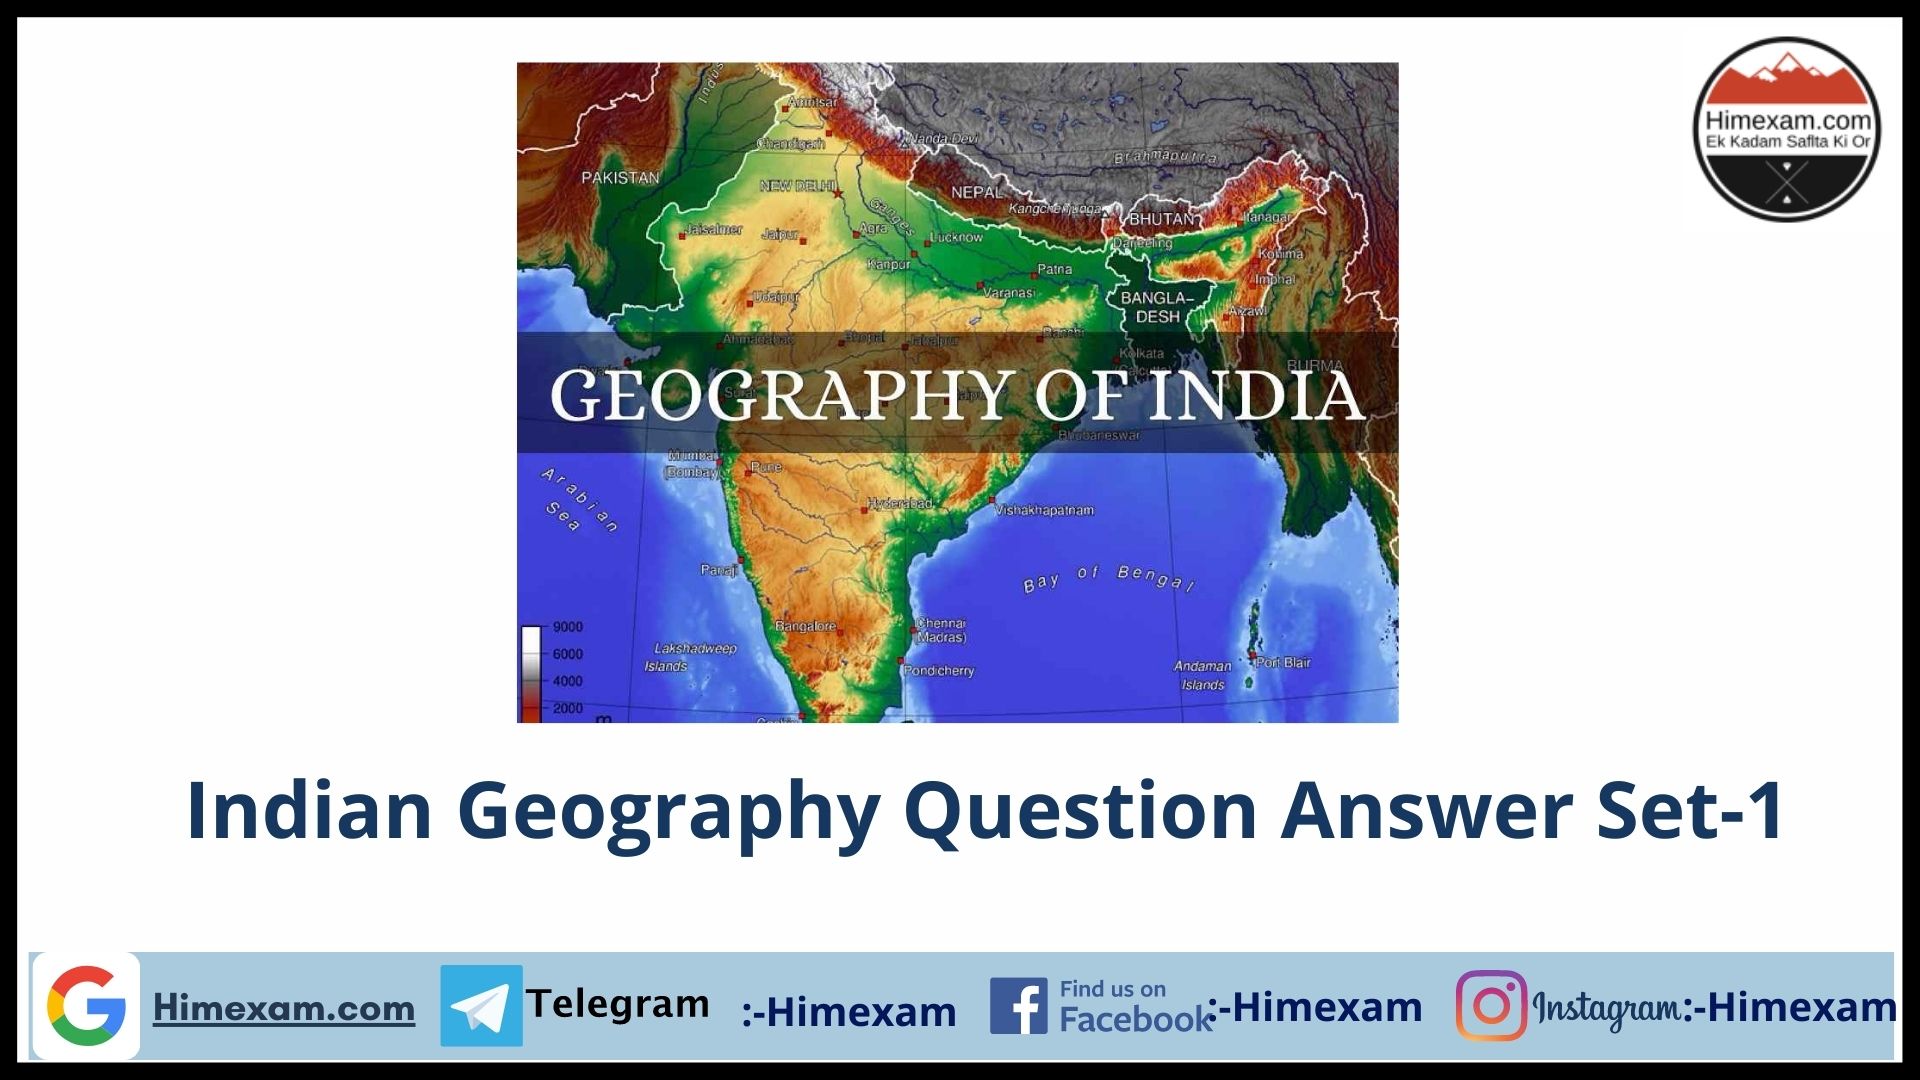 Indian Geography Question Answer Set-1